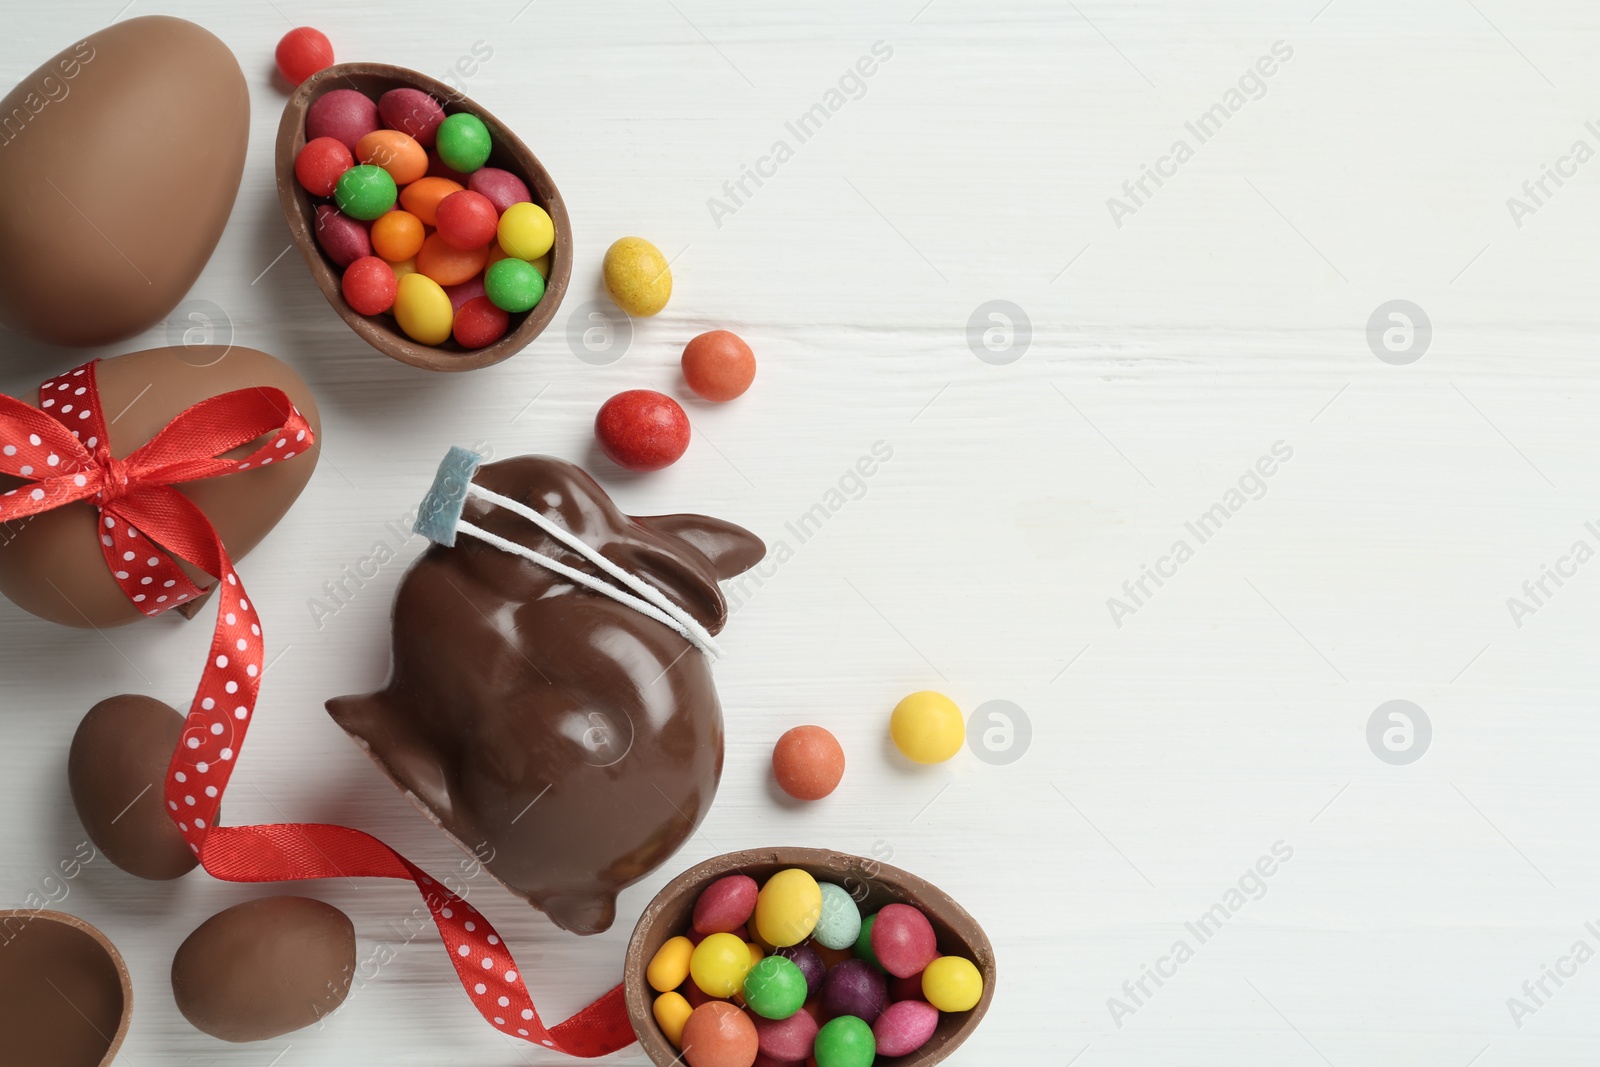 Photo of Chocolate bunny with protective mask, eggs and space for text on white wooden table, flat lay. Easter holiday during COVID-19 quarantine